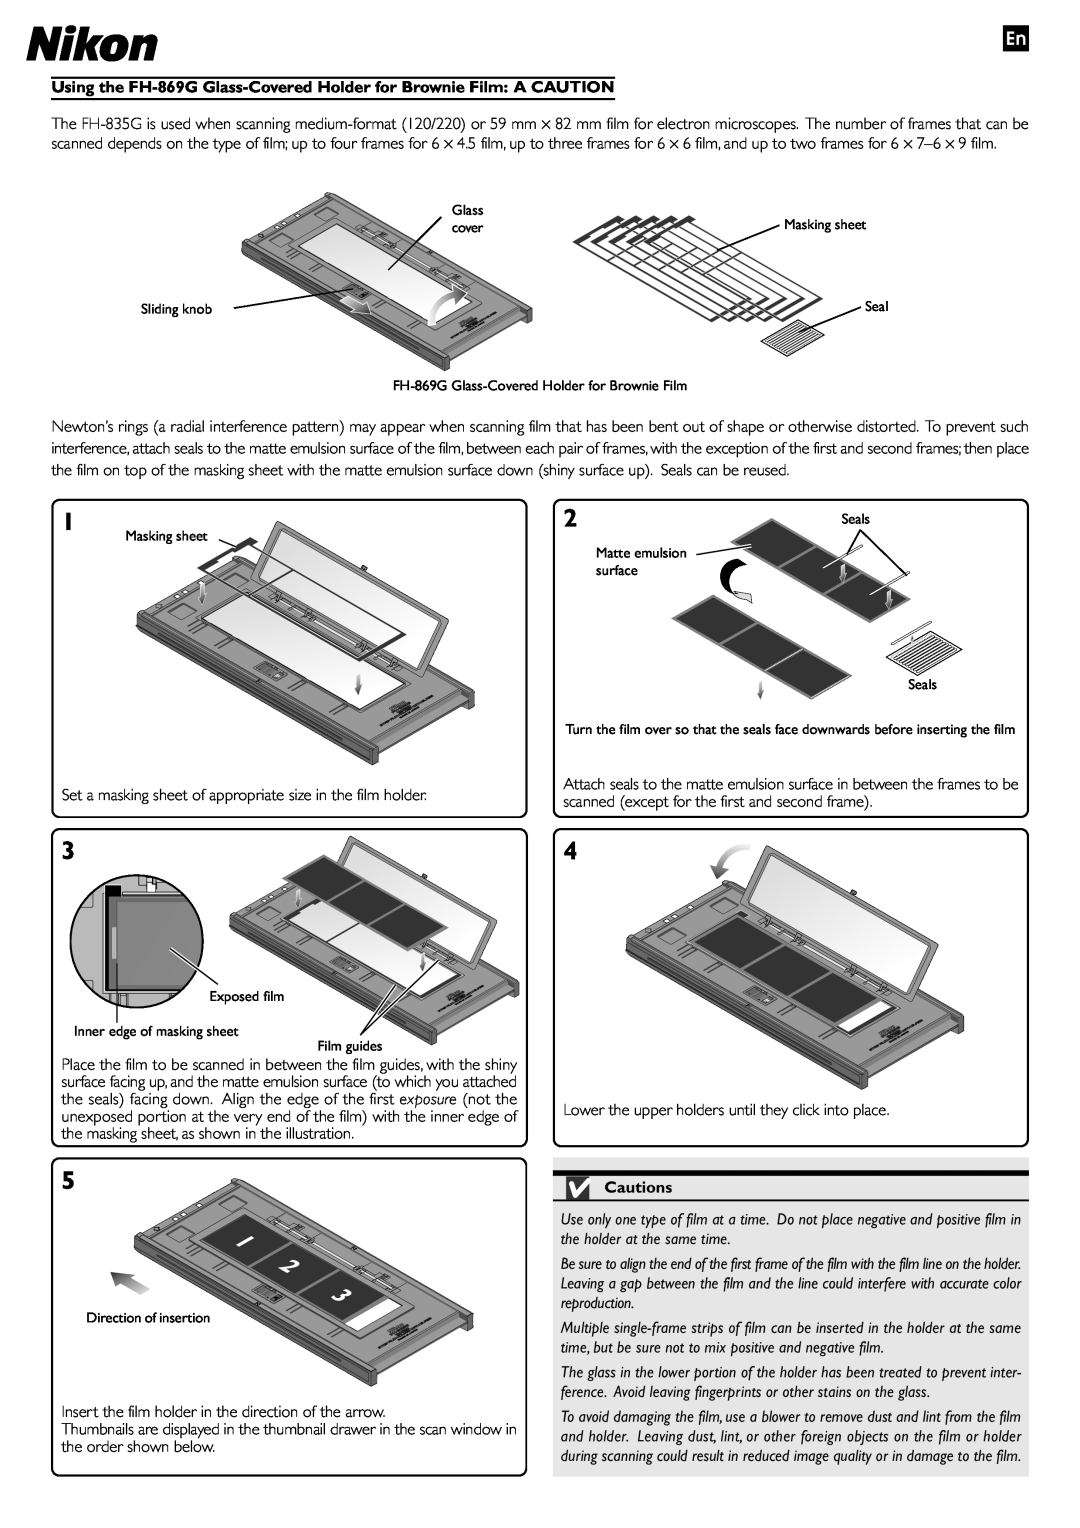 Nikon manual Using the FH-869G Glass-Covered Holder for Brownie Film A CAUTION, Cautions 